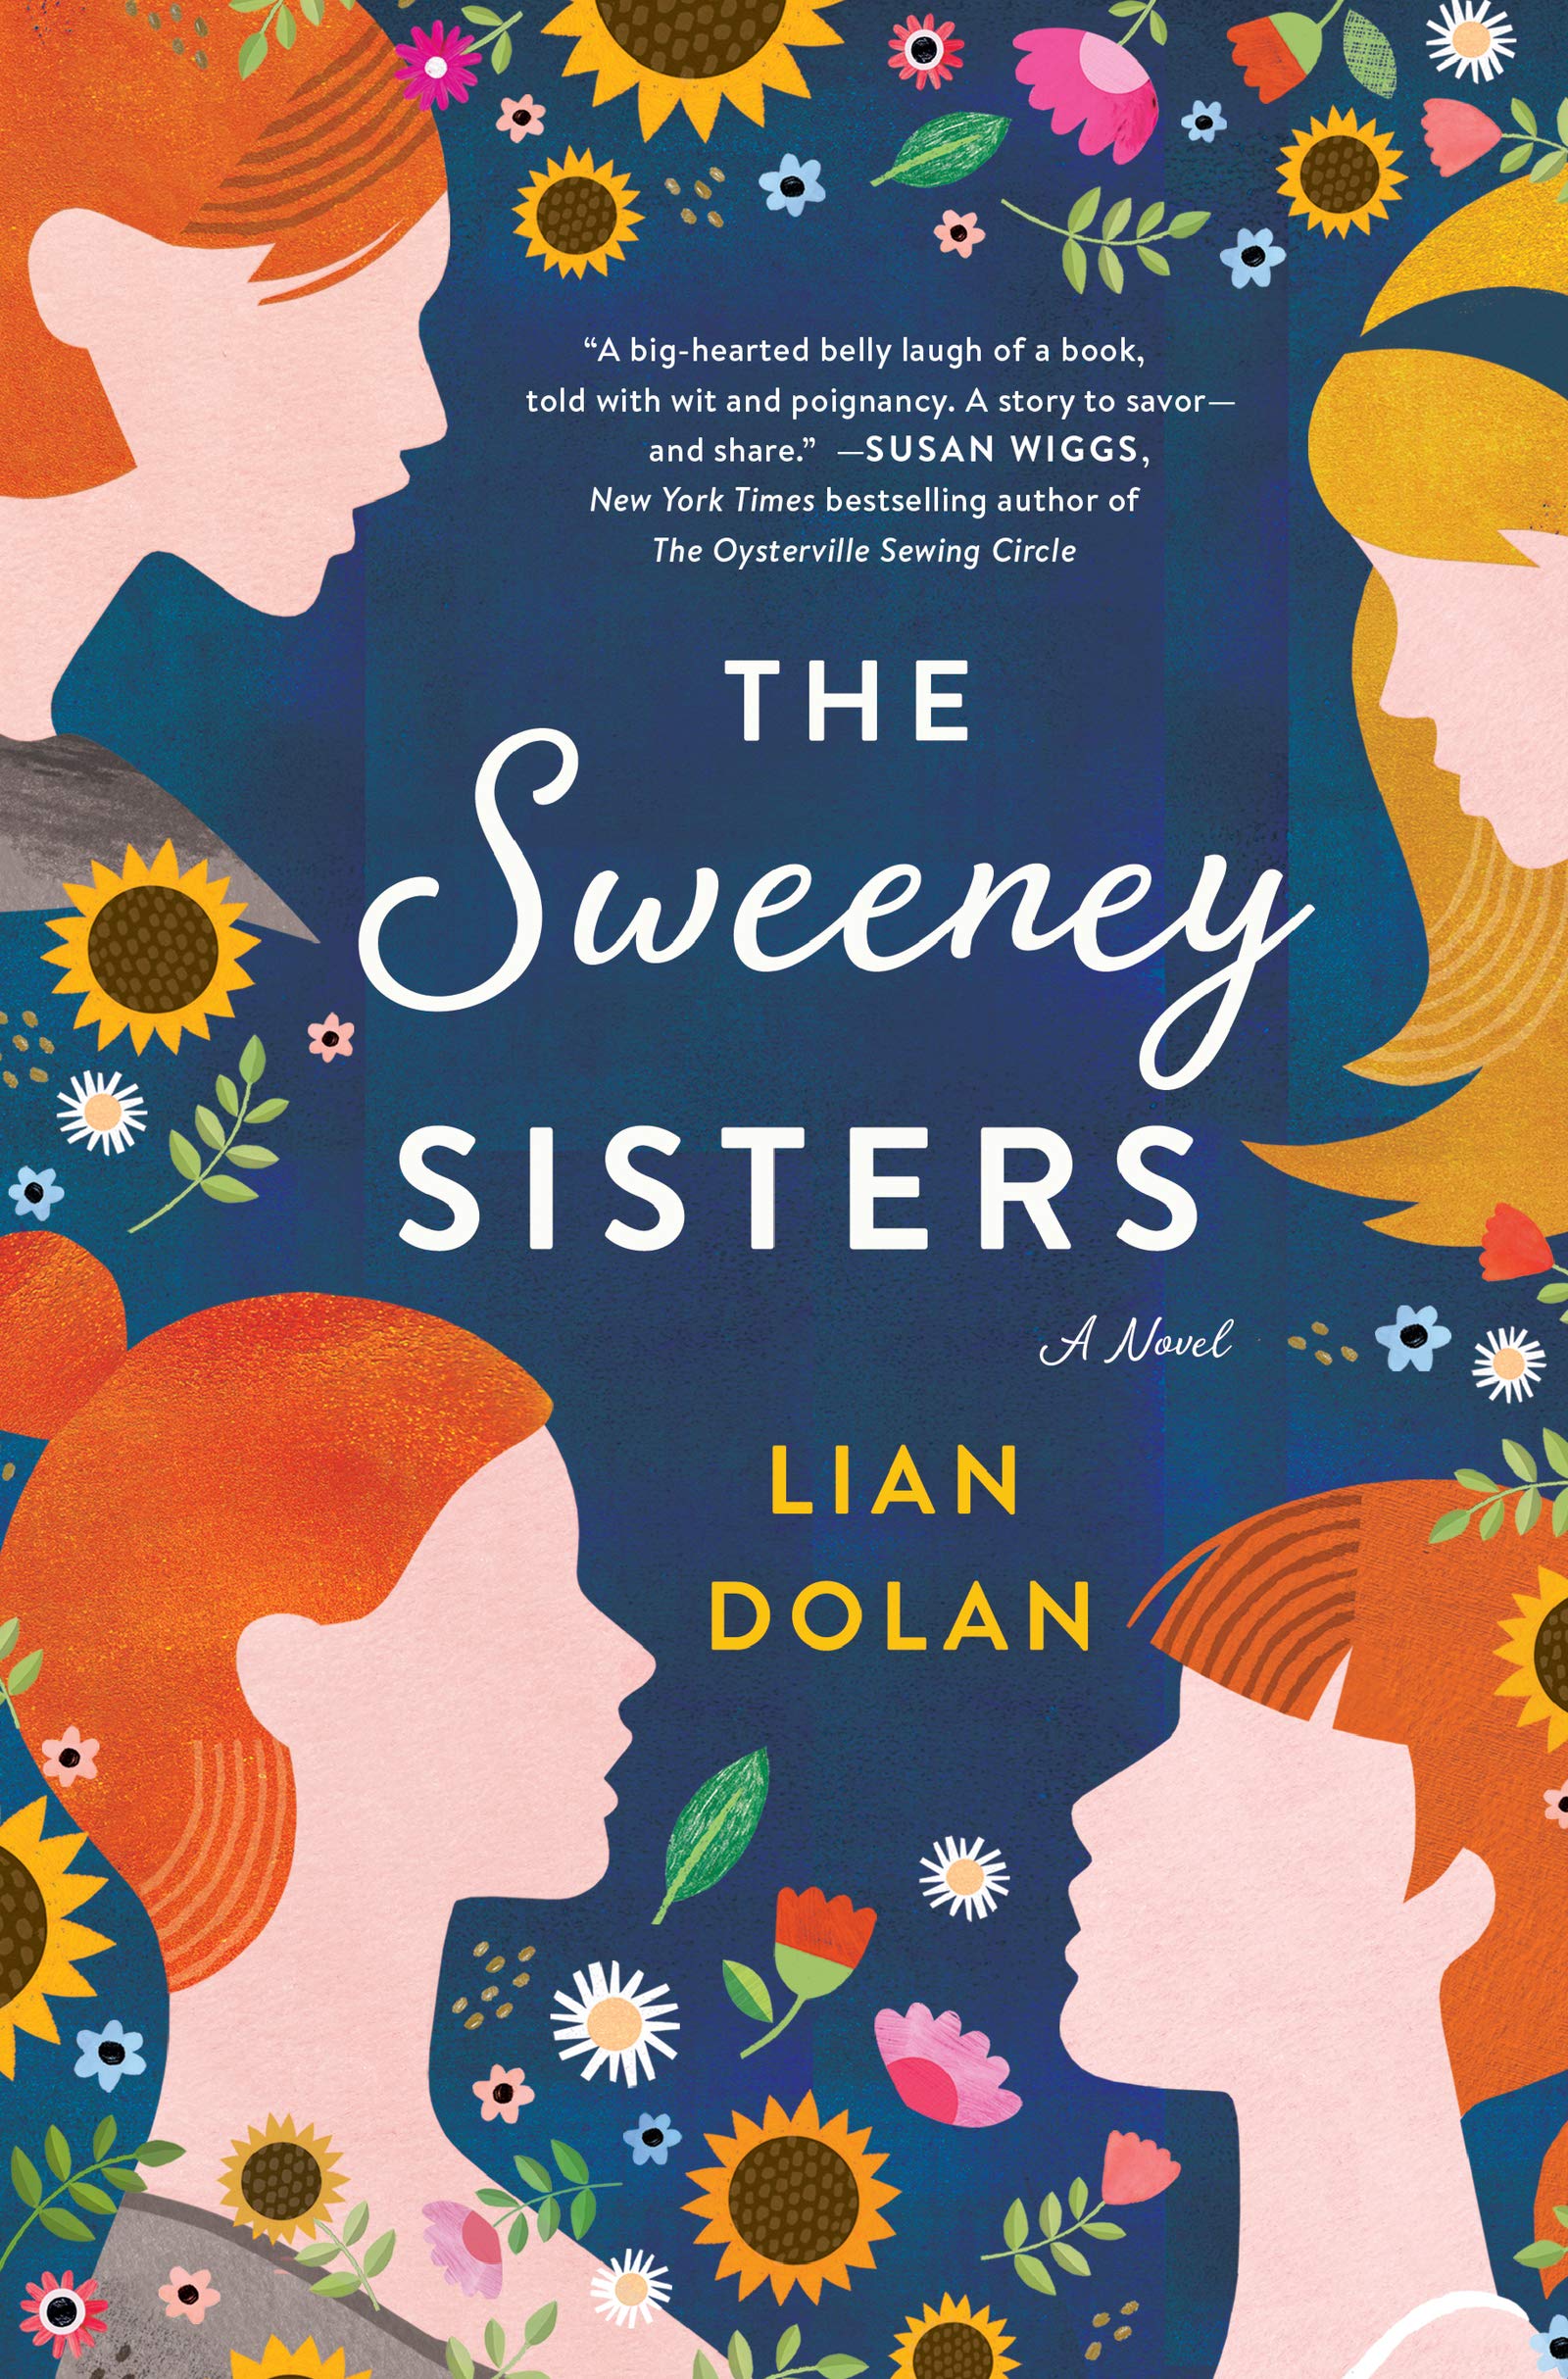 Book Review: “The Sweeney Sisters” by Lian Dolan